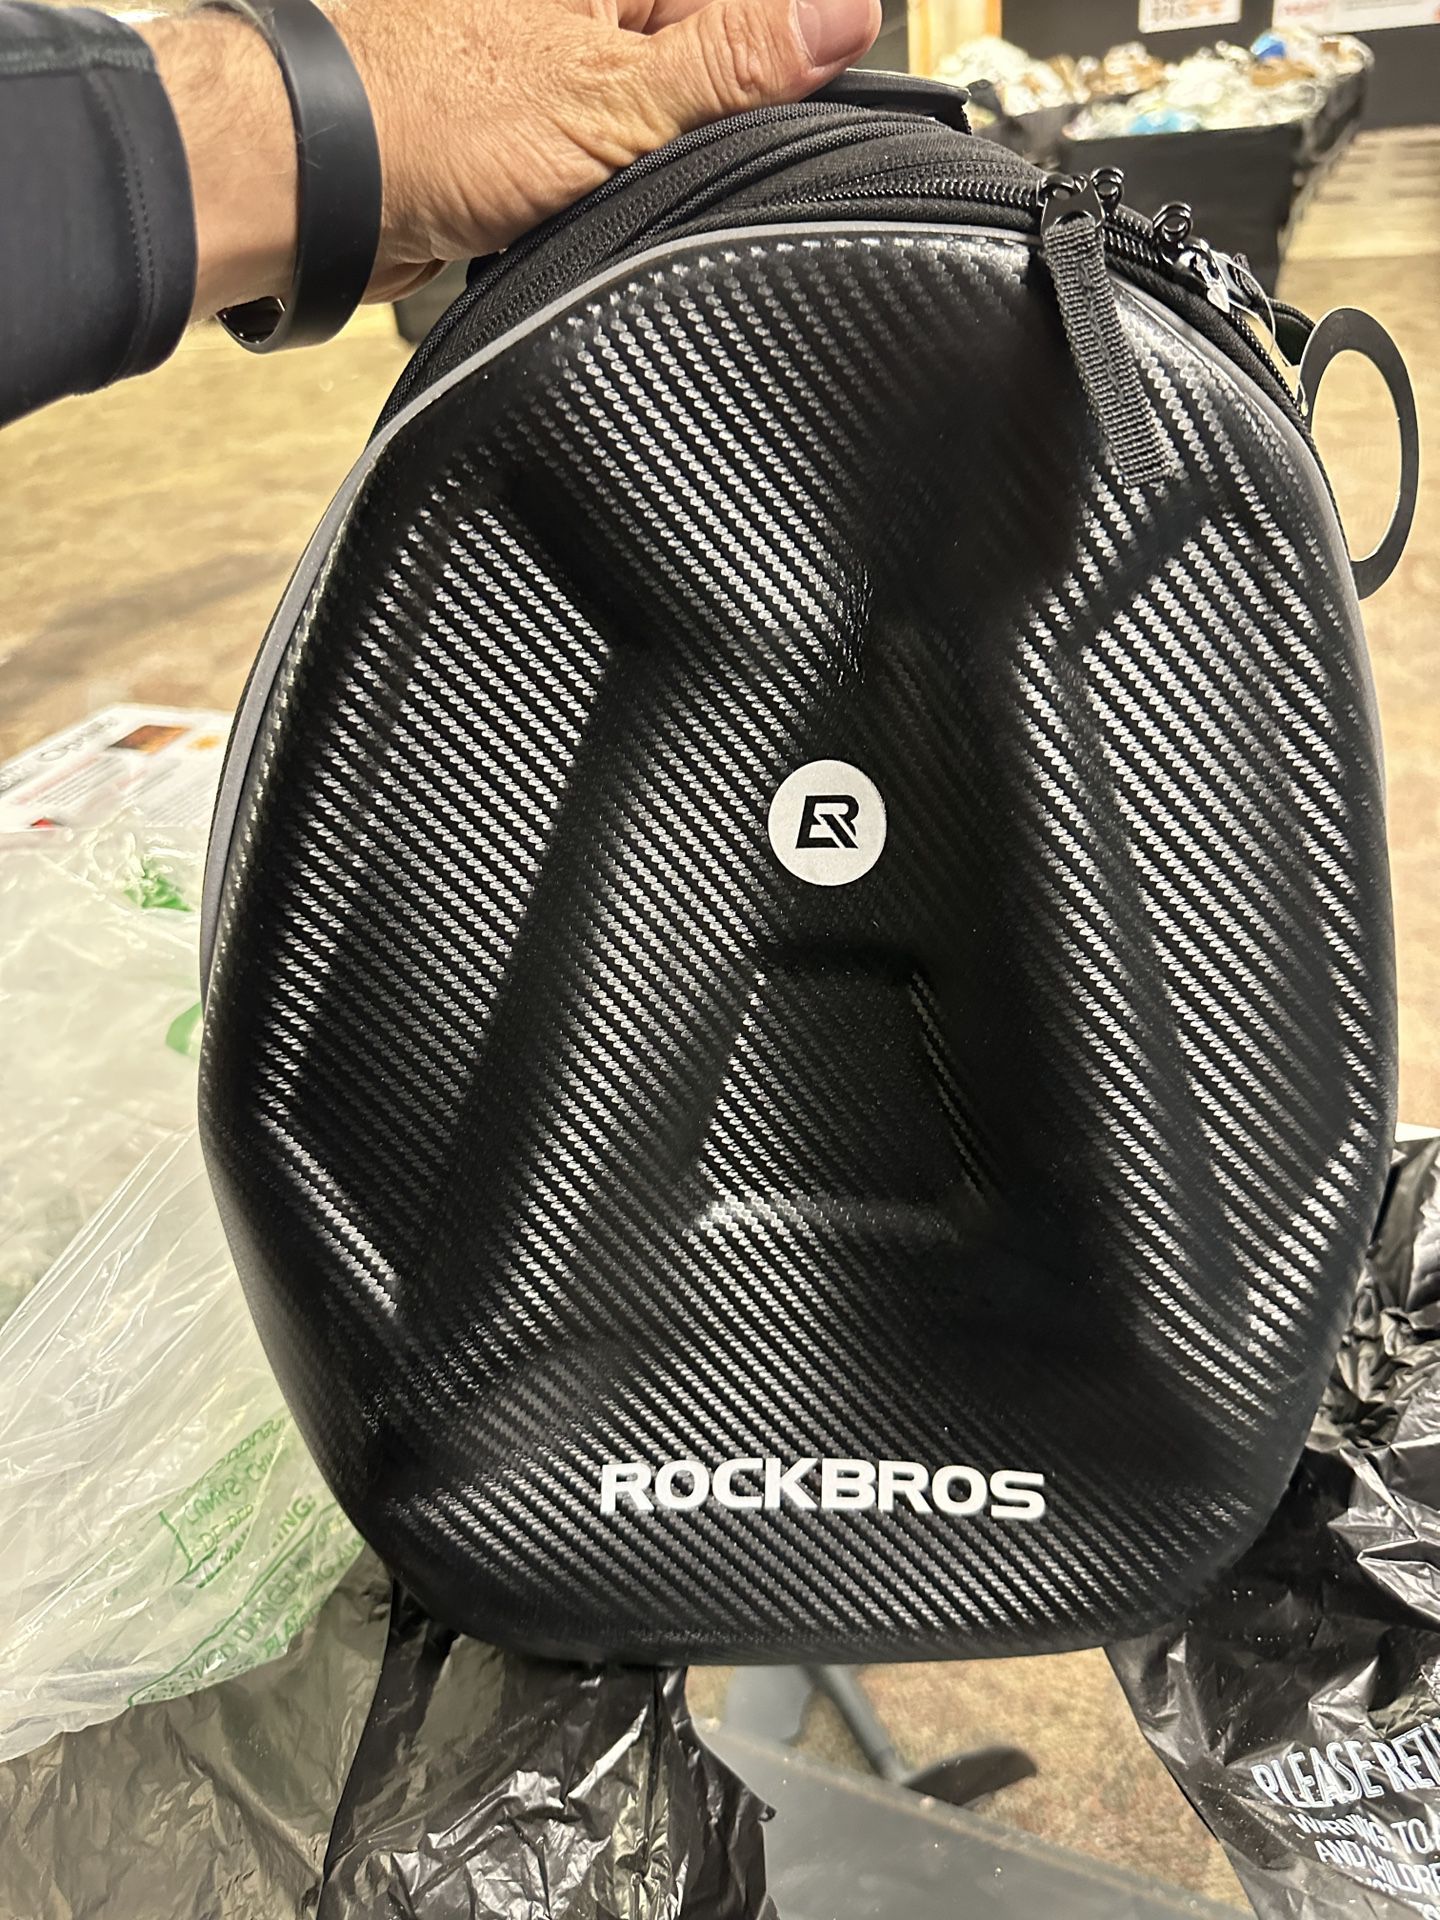 Backpack for Motorcycle Riders 